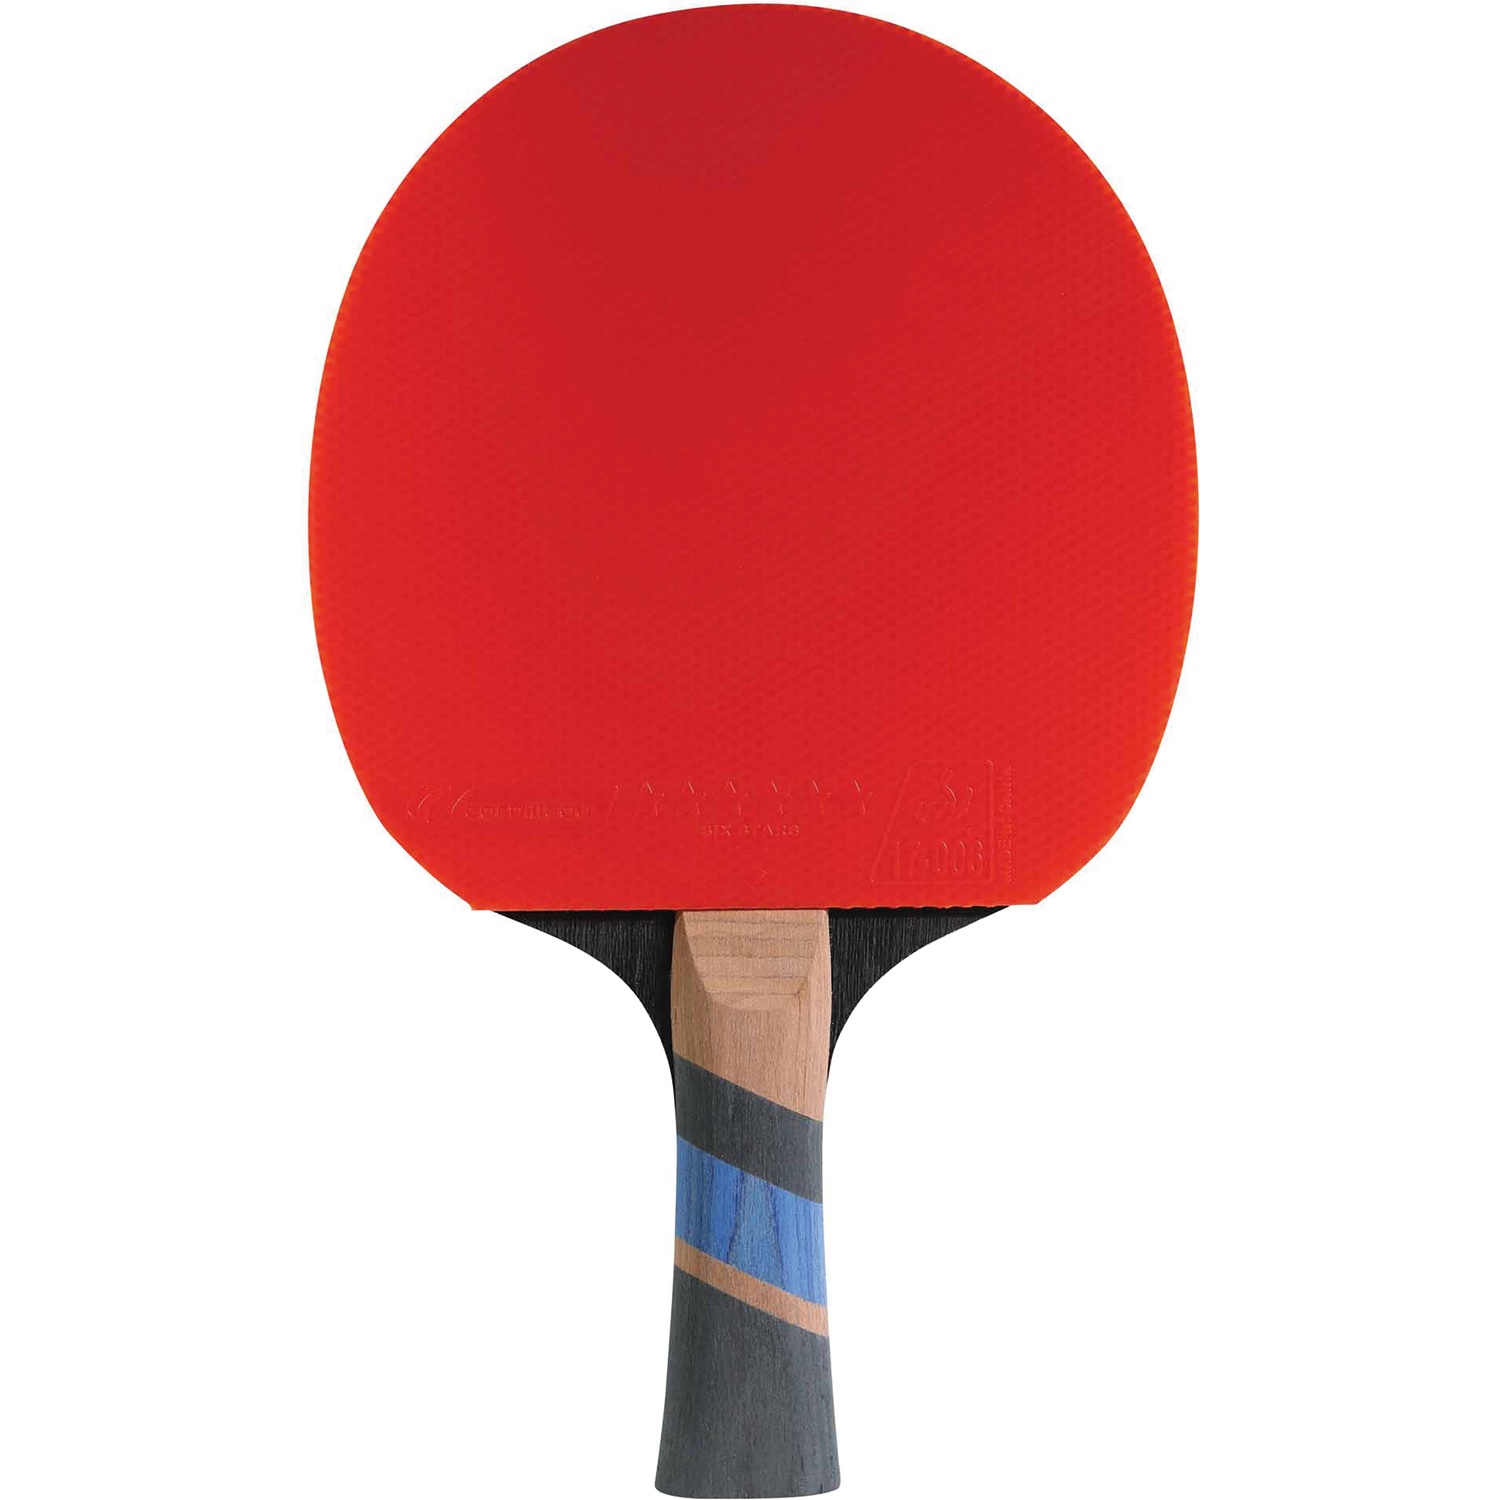 Ping Pong Cornililleau Sport 1000 Excel Carbon 411000 | Sport Zone MKP